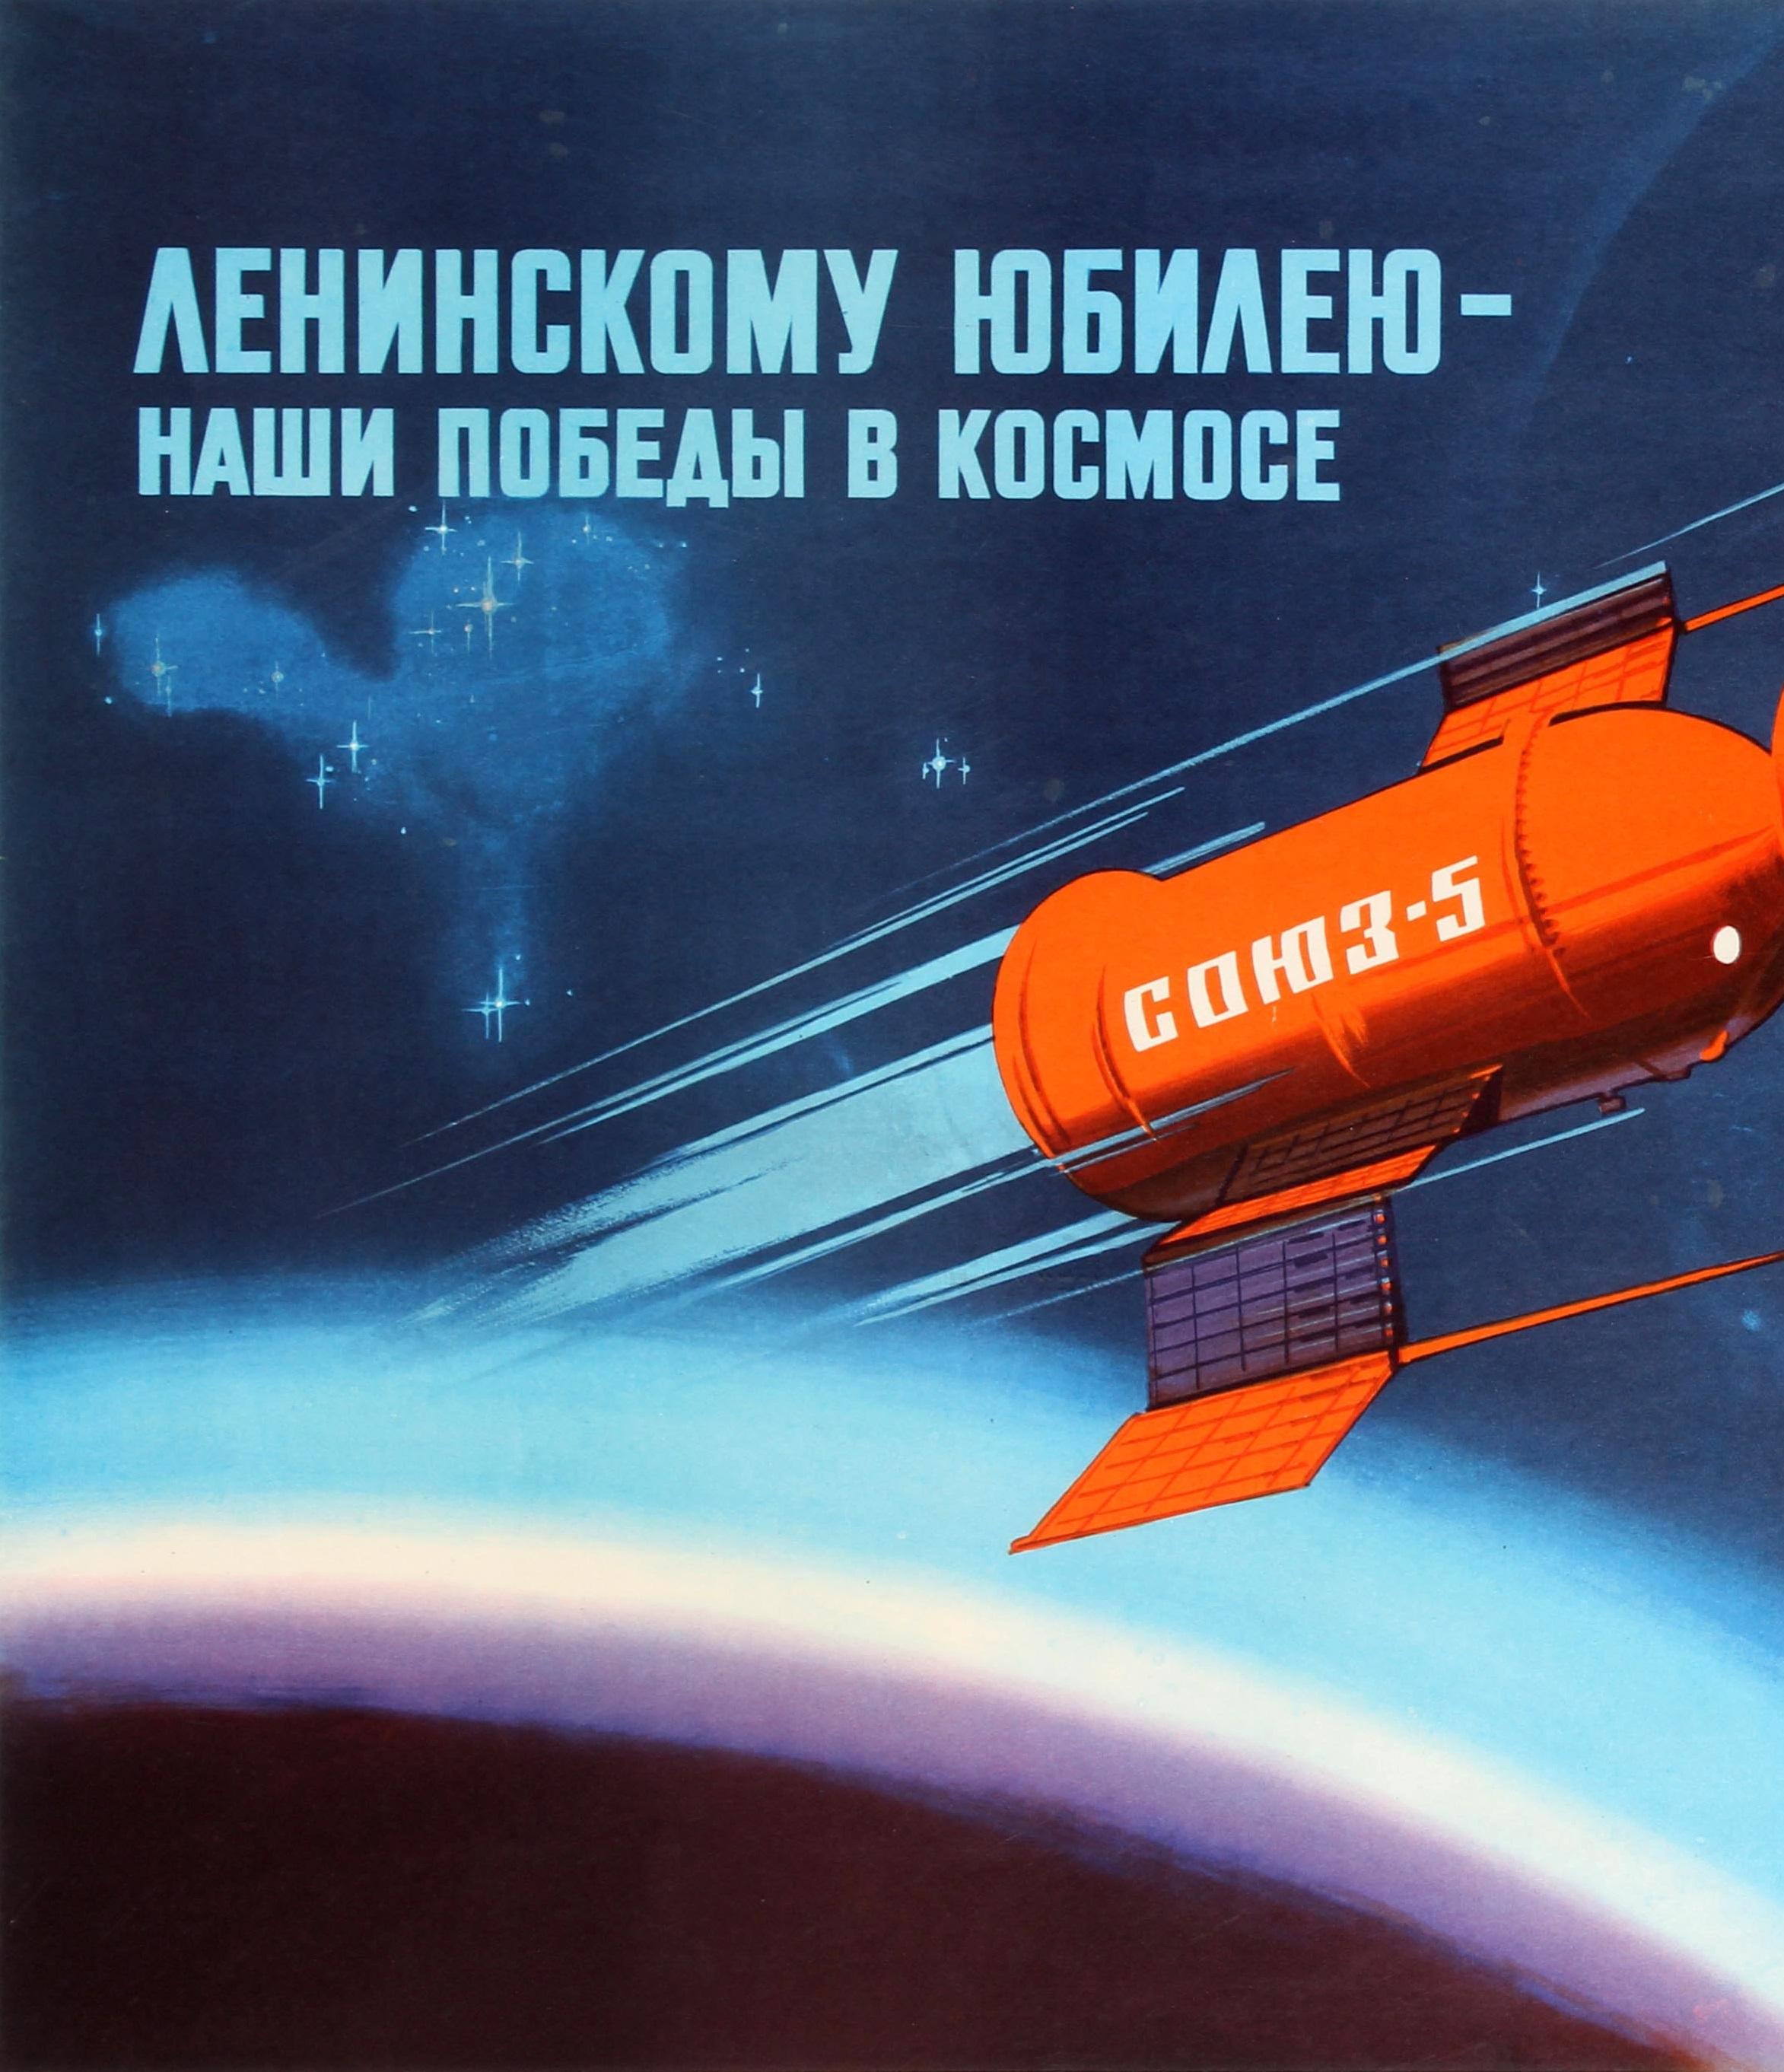 Original vintage Soviet propaganda poster - To Lenin's Anniversary Our Victories in Space - featuring a dynamic illustration of an orange satellite marked in white text on the side reading Soyuz-5 and Soyuz-4 in space orbiting the earth against the